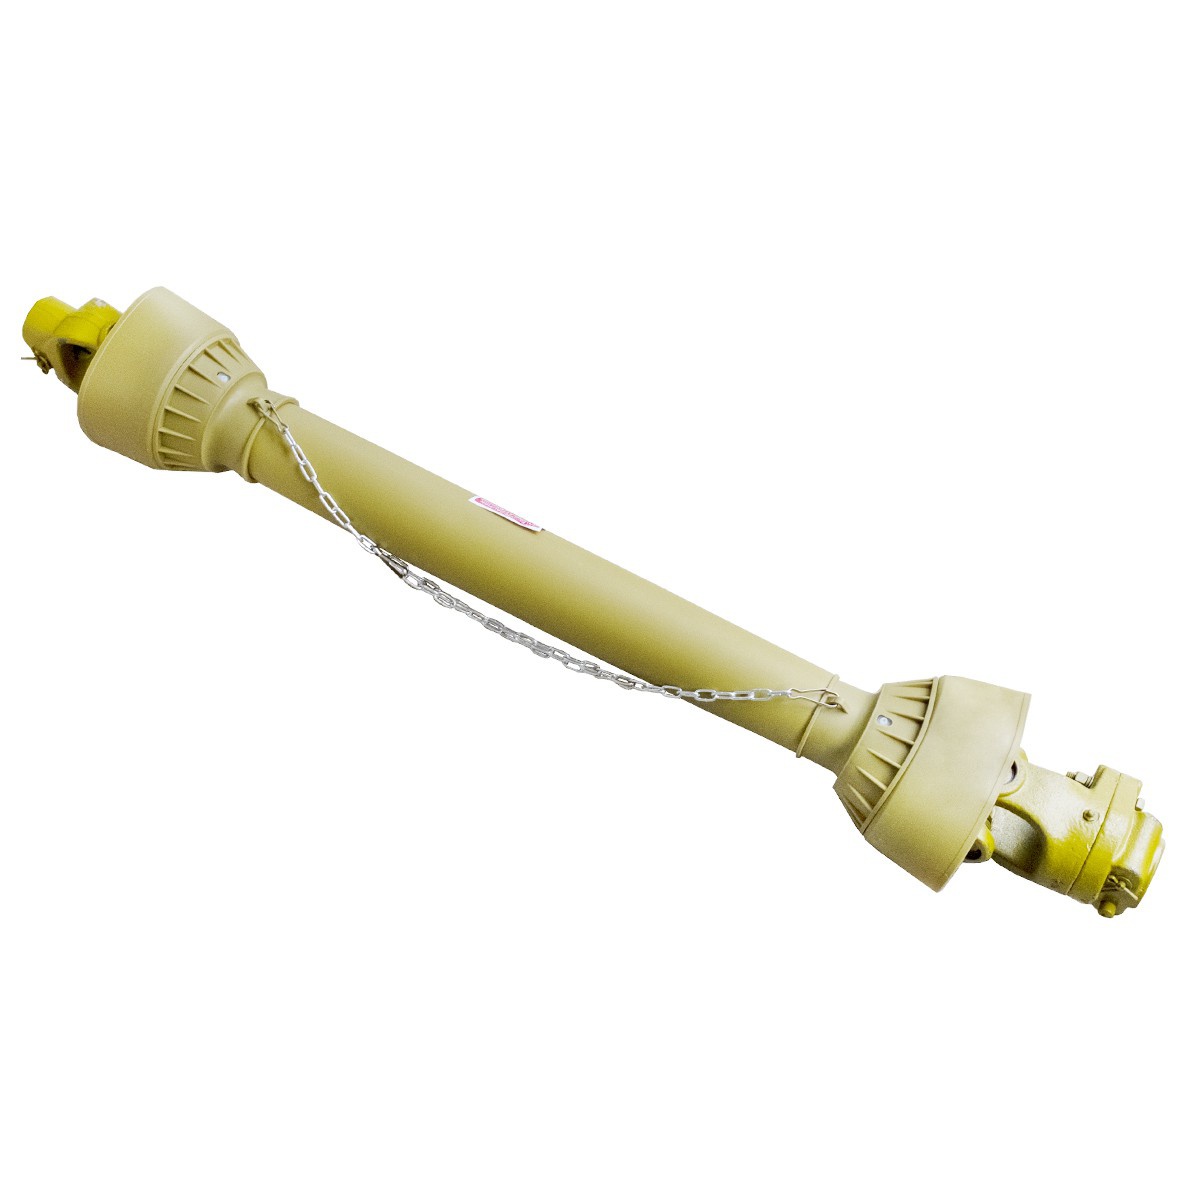 065b 60 100km approximately 900nm - PTO shaft with breakaway wedge 065B - 130 cm / up to 100 HP